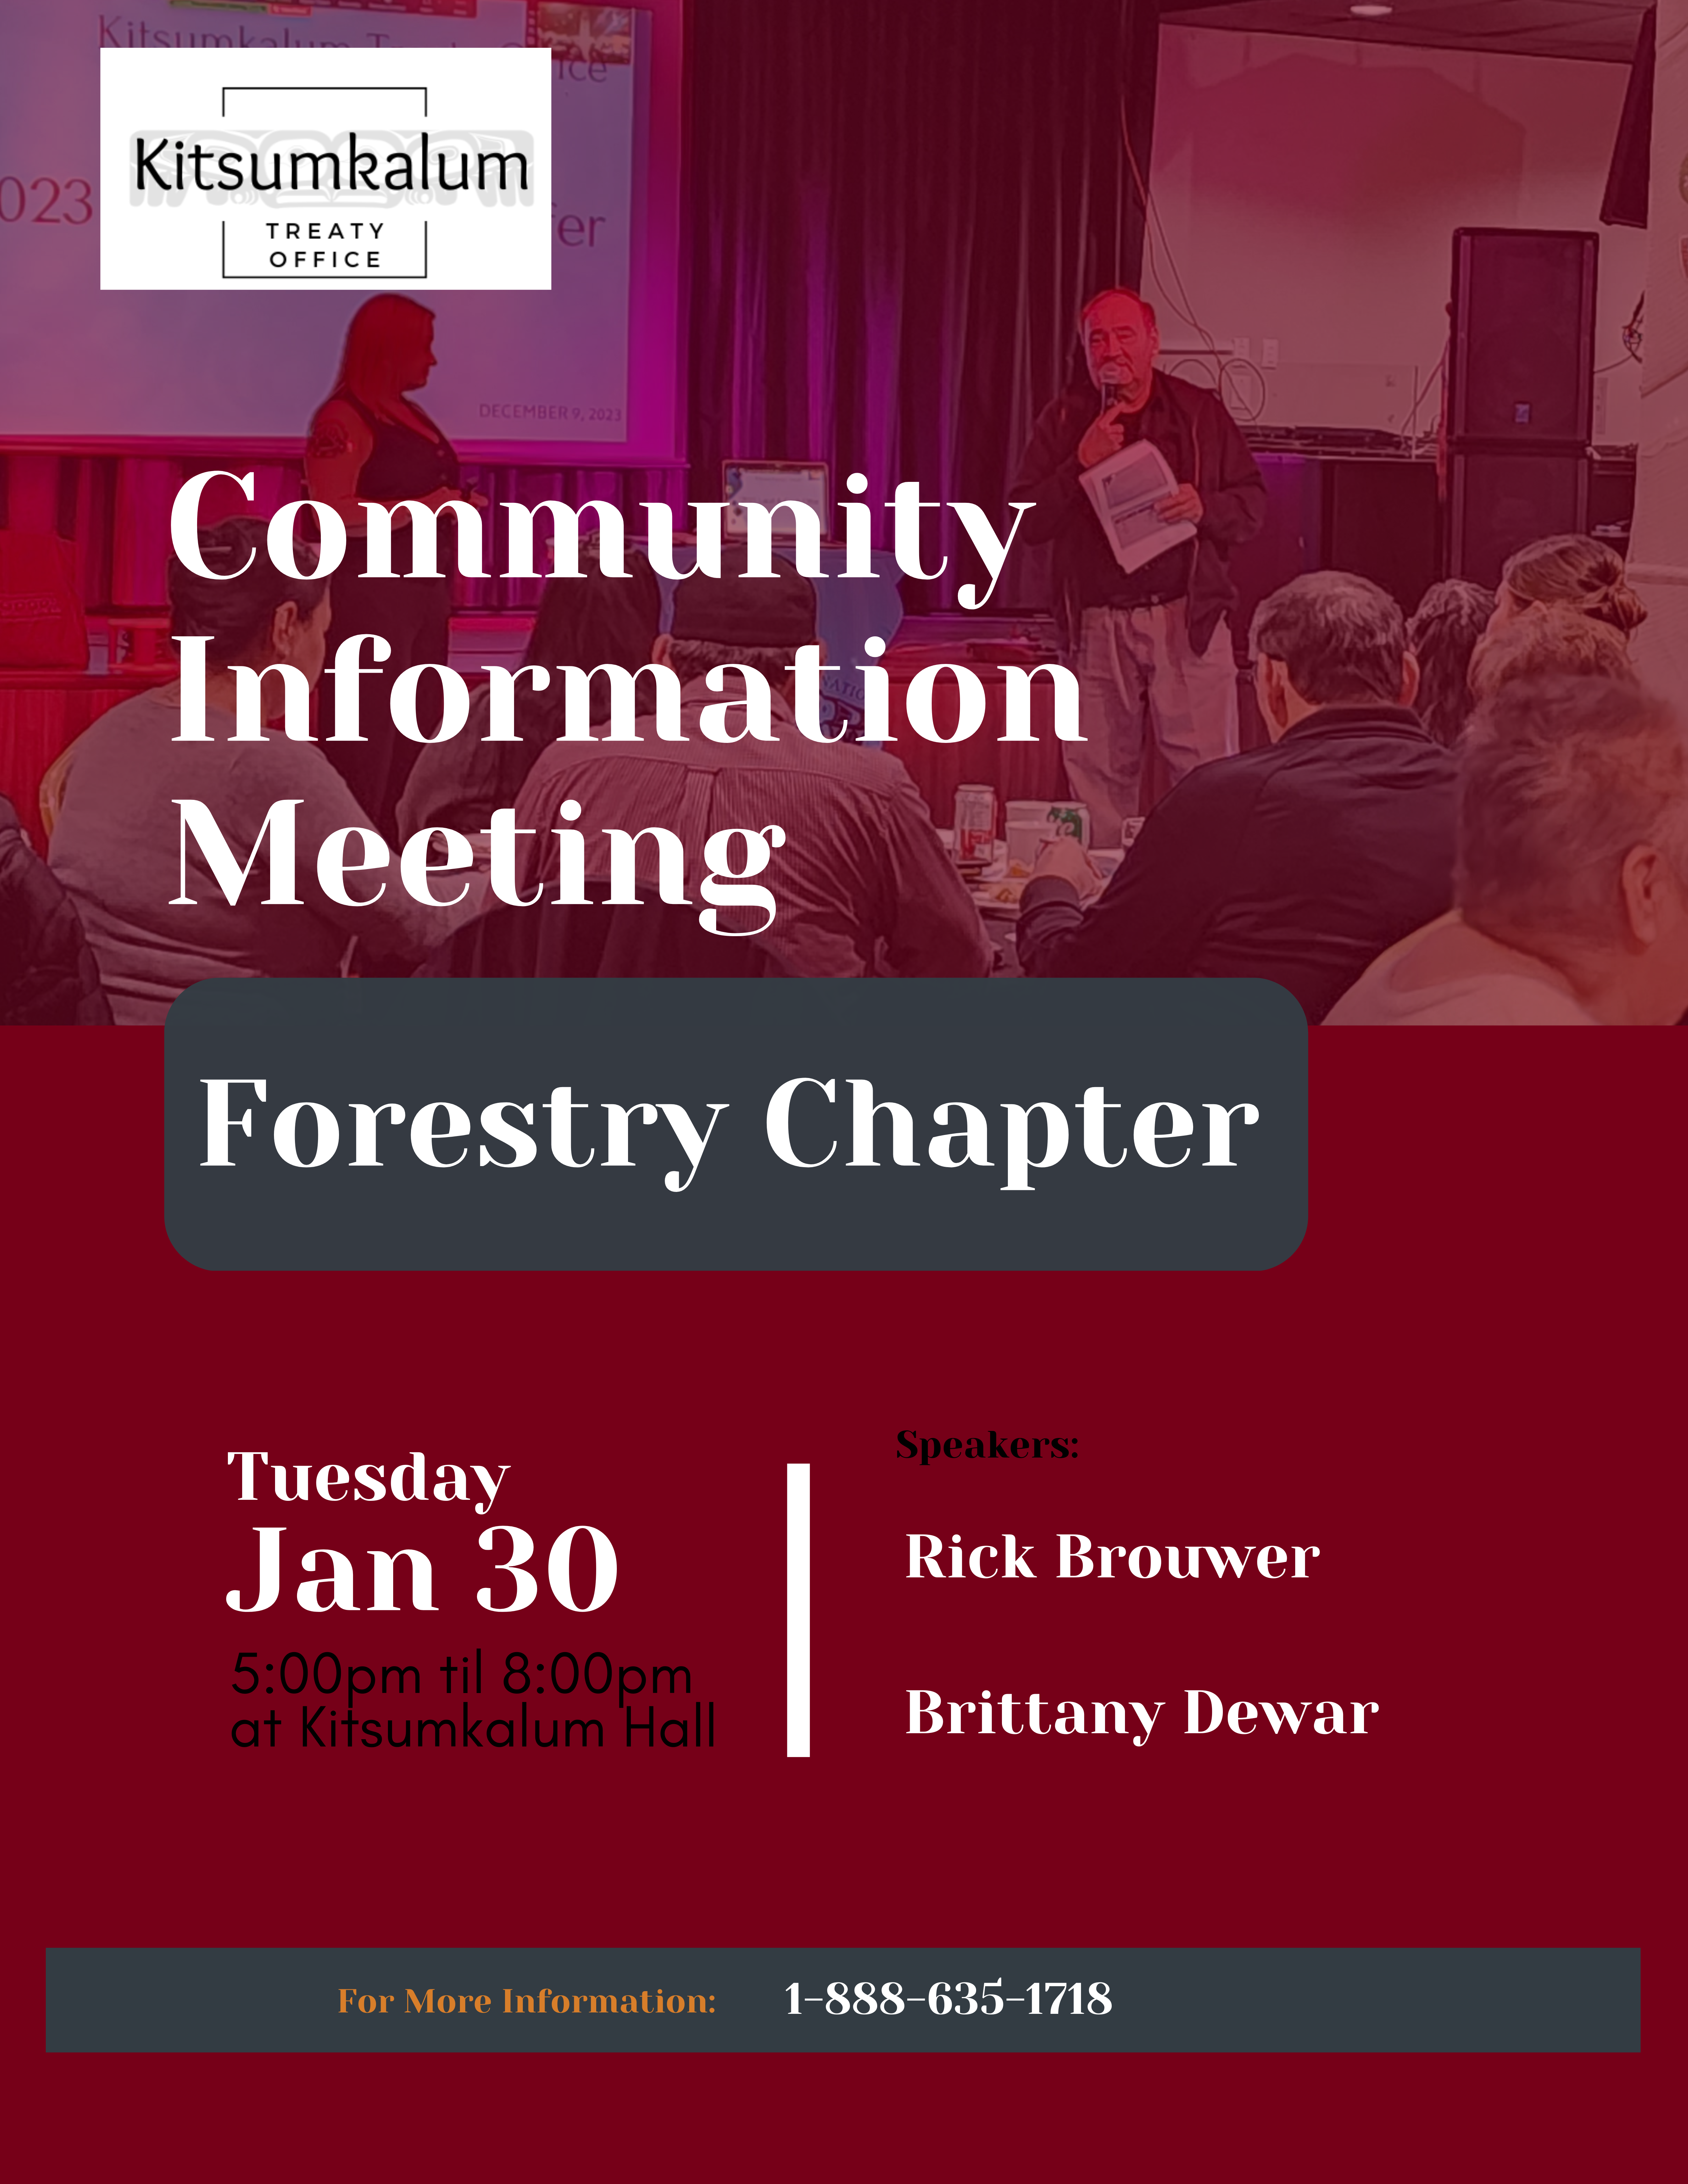 Community Information Meeting on Forestry